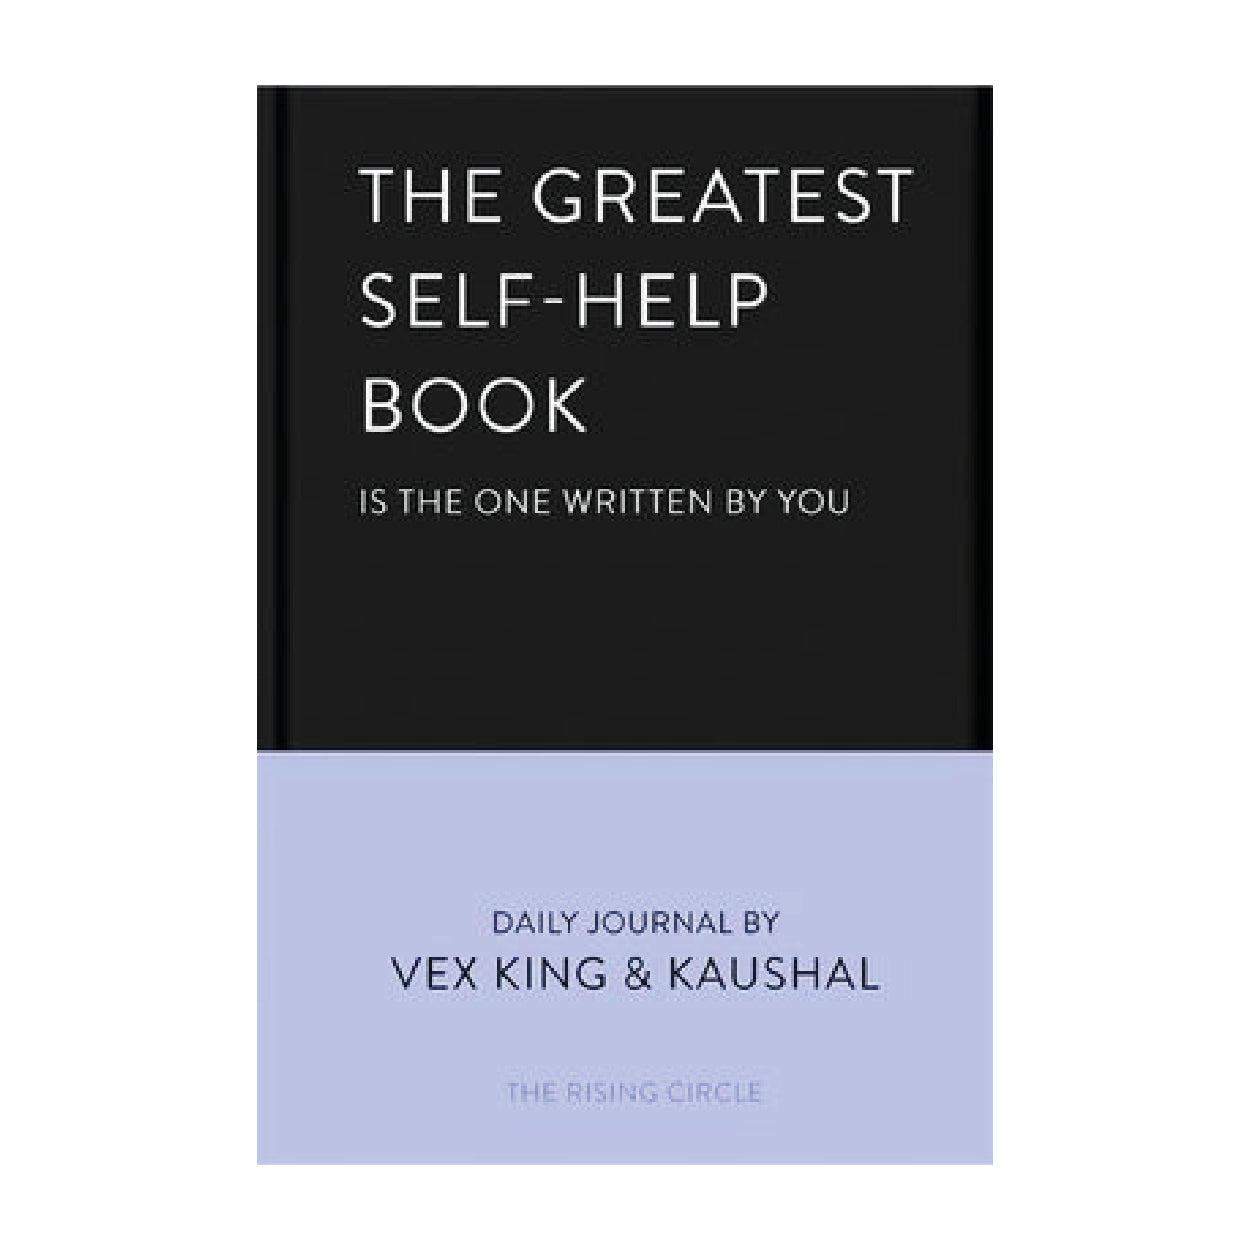 The Greatest Self-Help Book (Is The One Written By You)